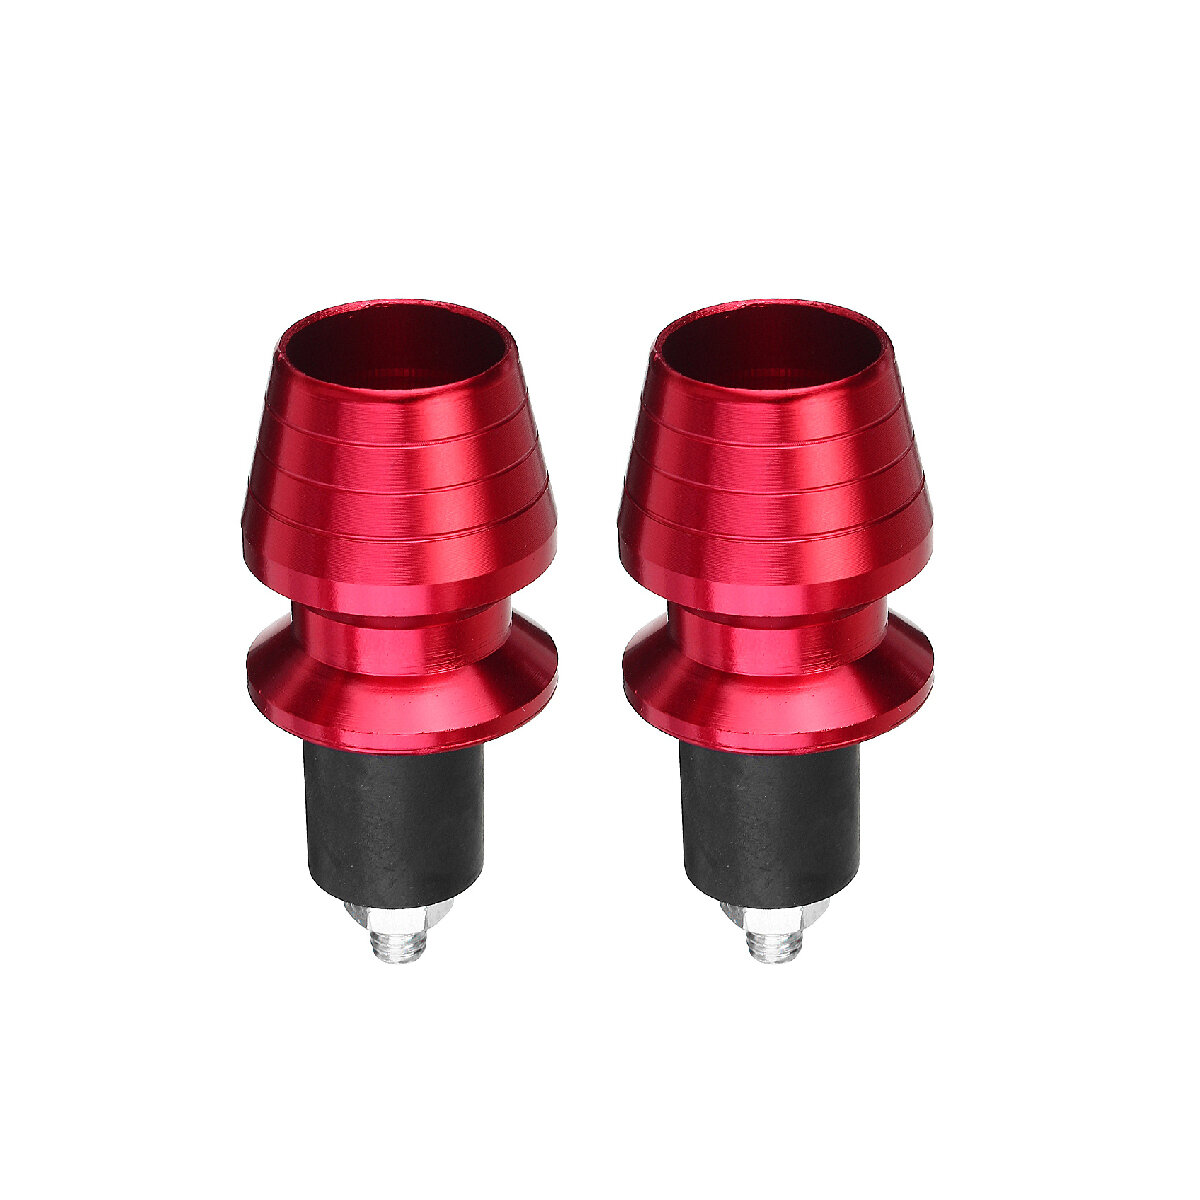 7/8 Inch 22mm Motorcycle Handle Bar Ends Plugs Aluminum Sporting Grip Caps